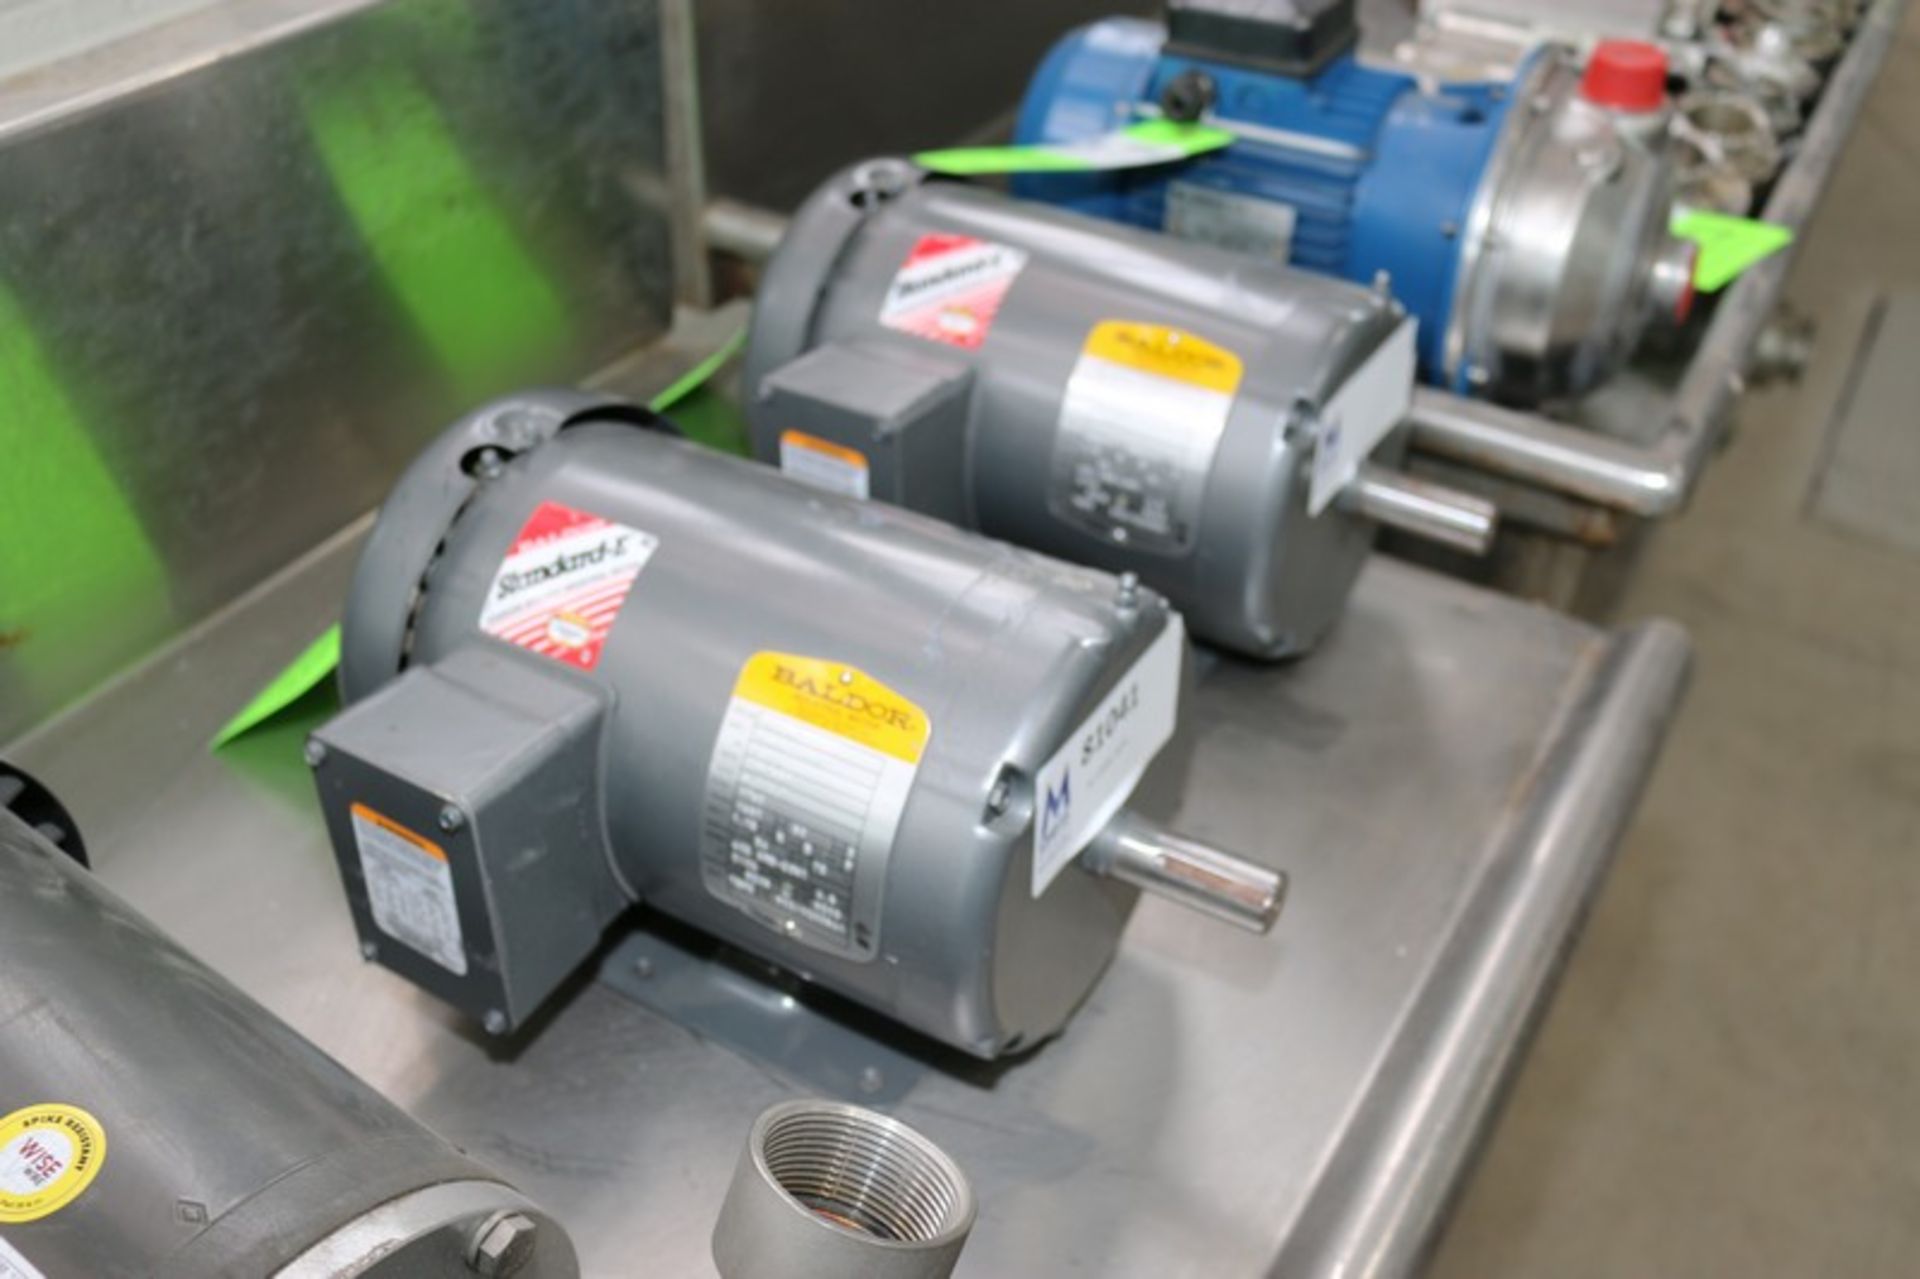 (2) NEW Baldor 1-1/2 hp Motors, 230/460 Volts, 3 Phase, 1740 RPM (INV#81041)(Located @ the MDG - Image 3 of 5